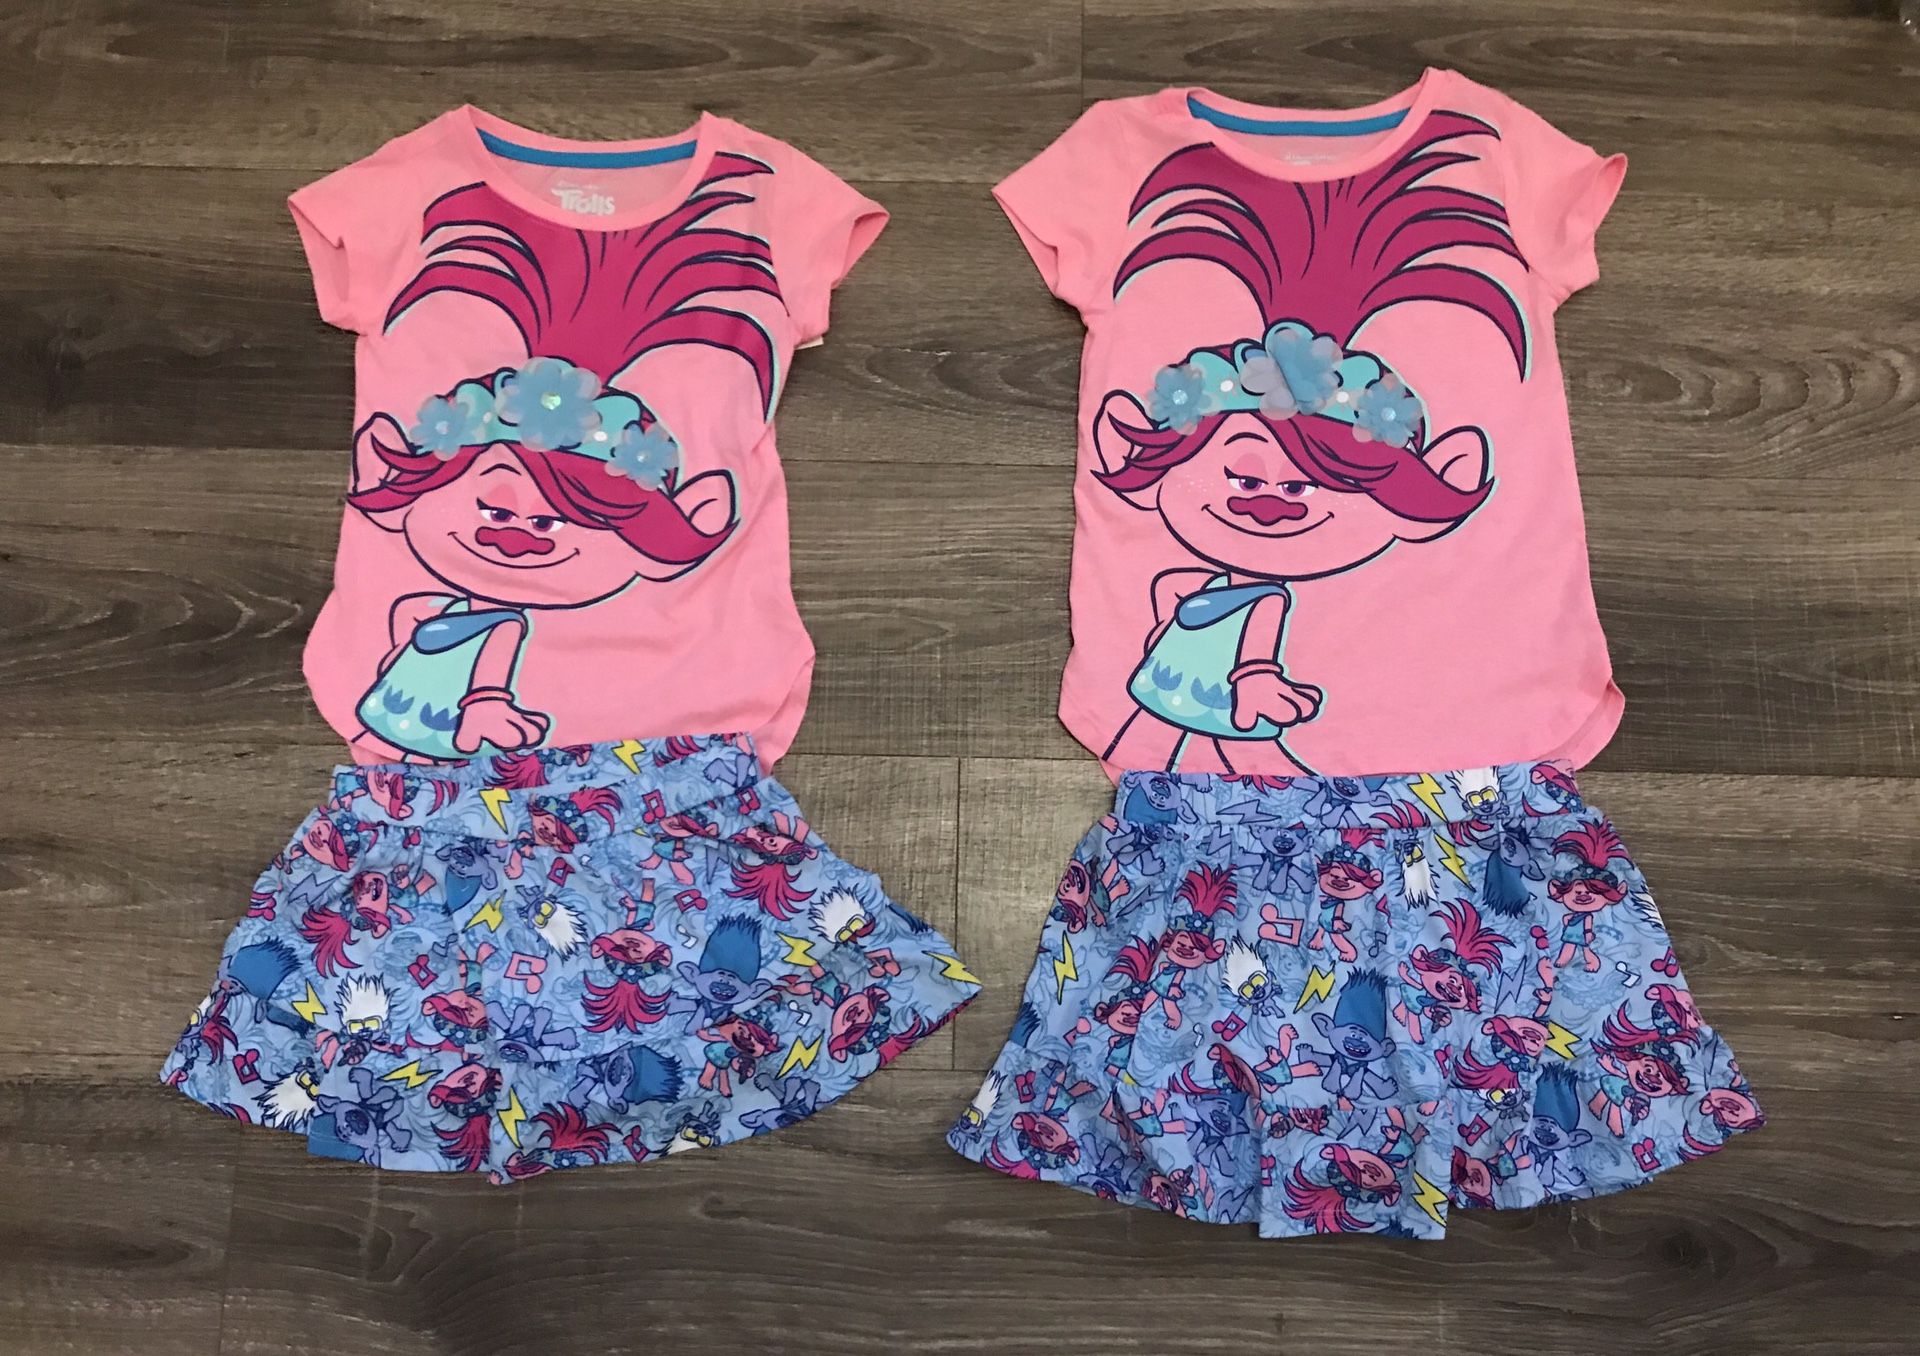 Troll Outfits (brand new) - size 4/5 and 6/6X